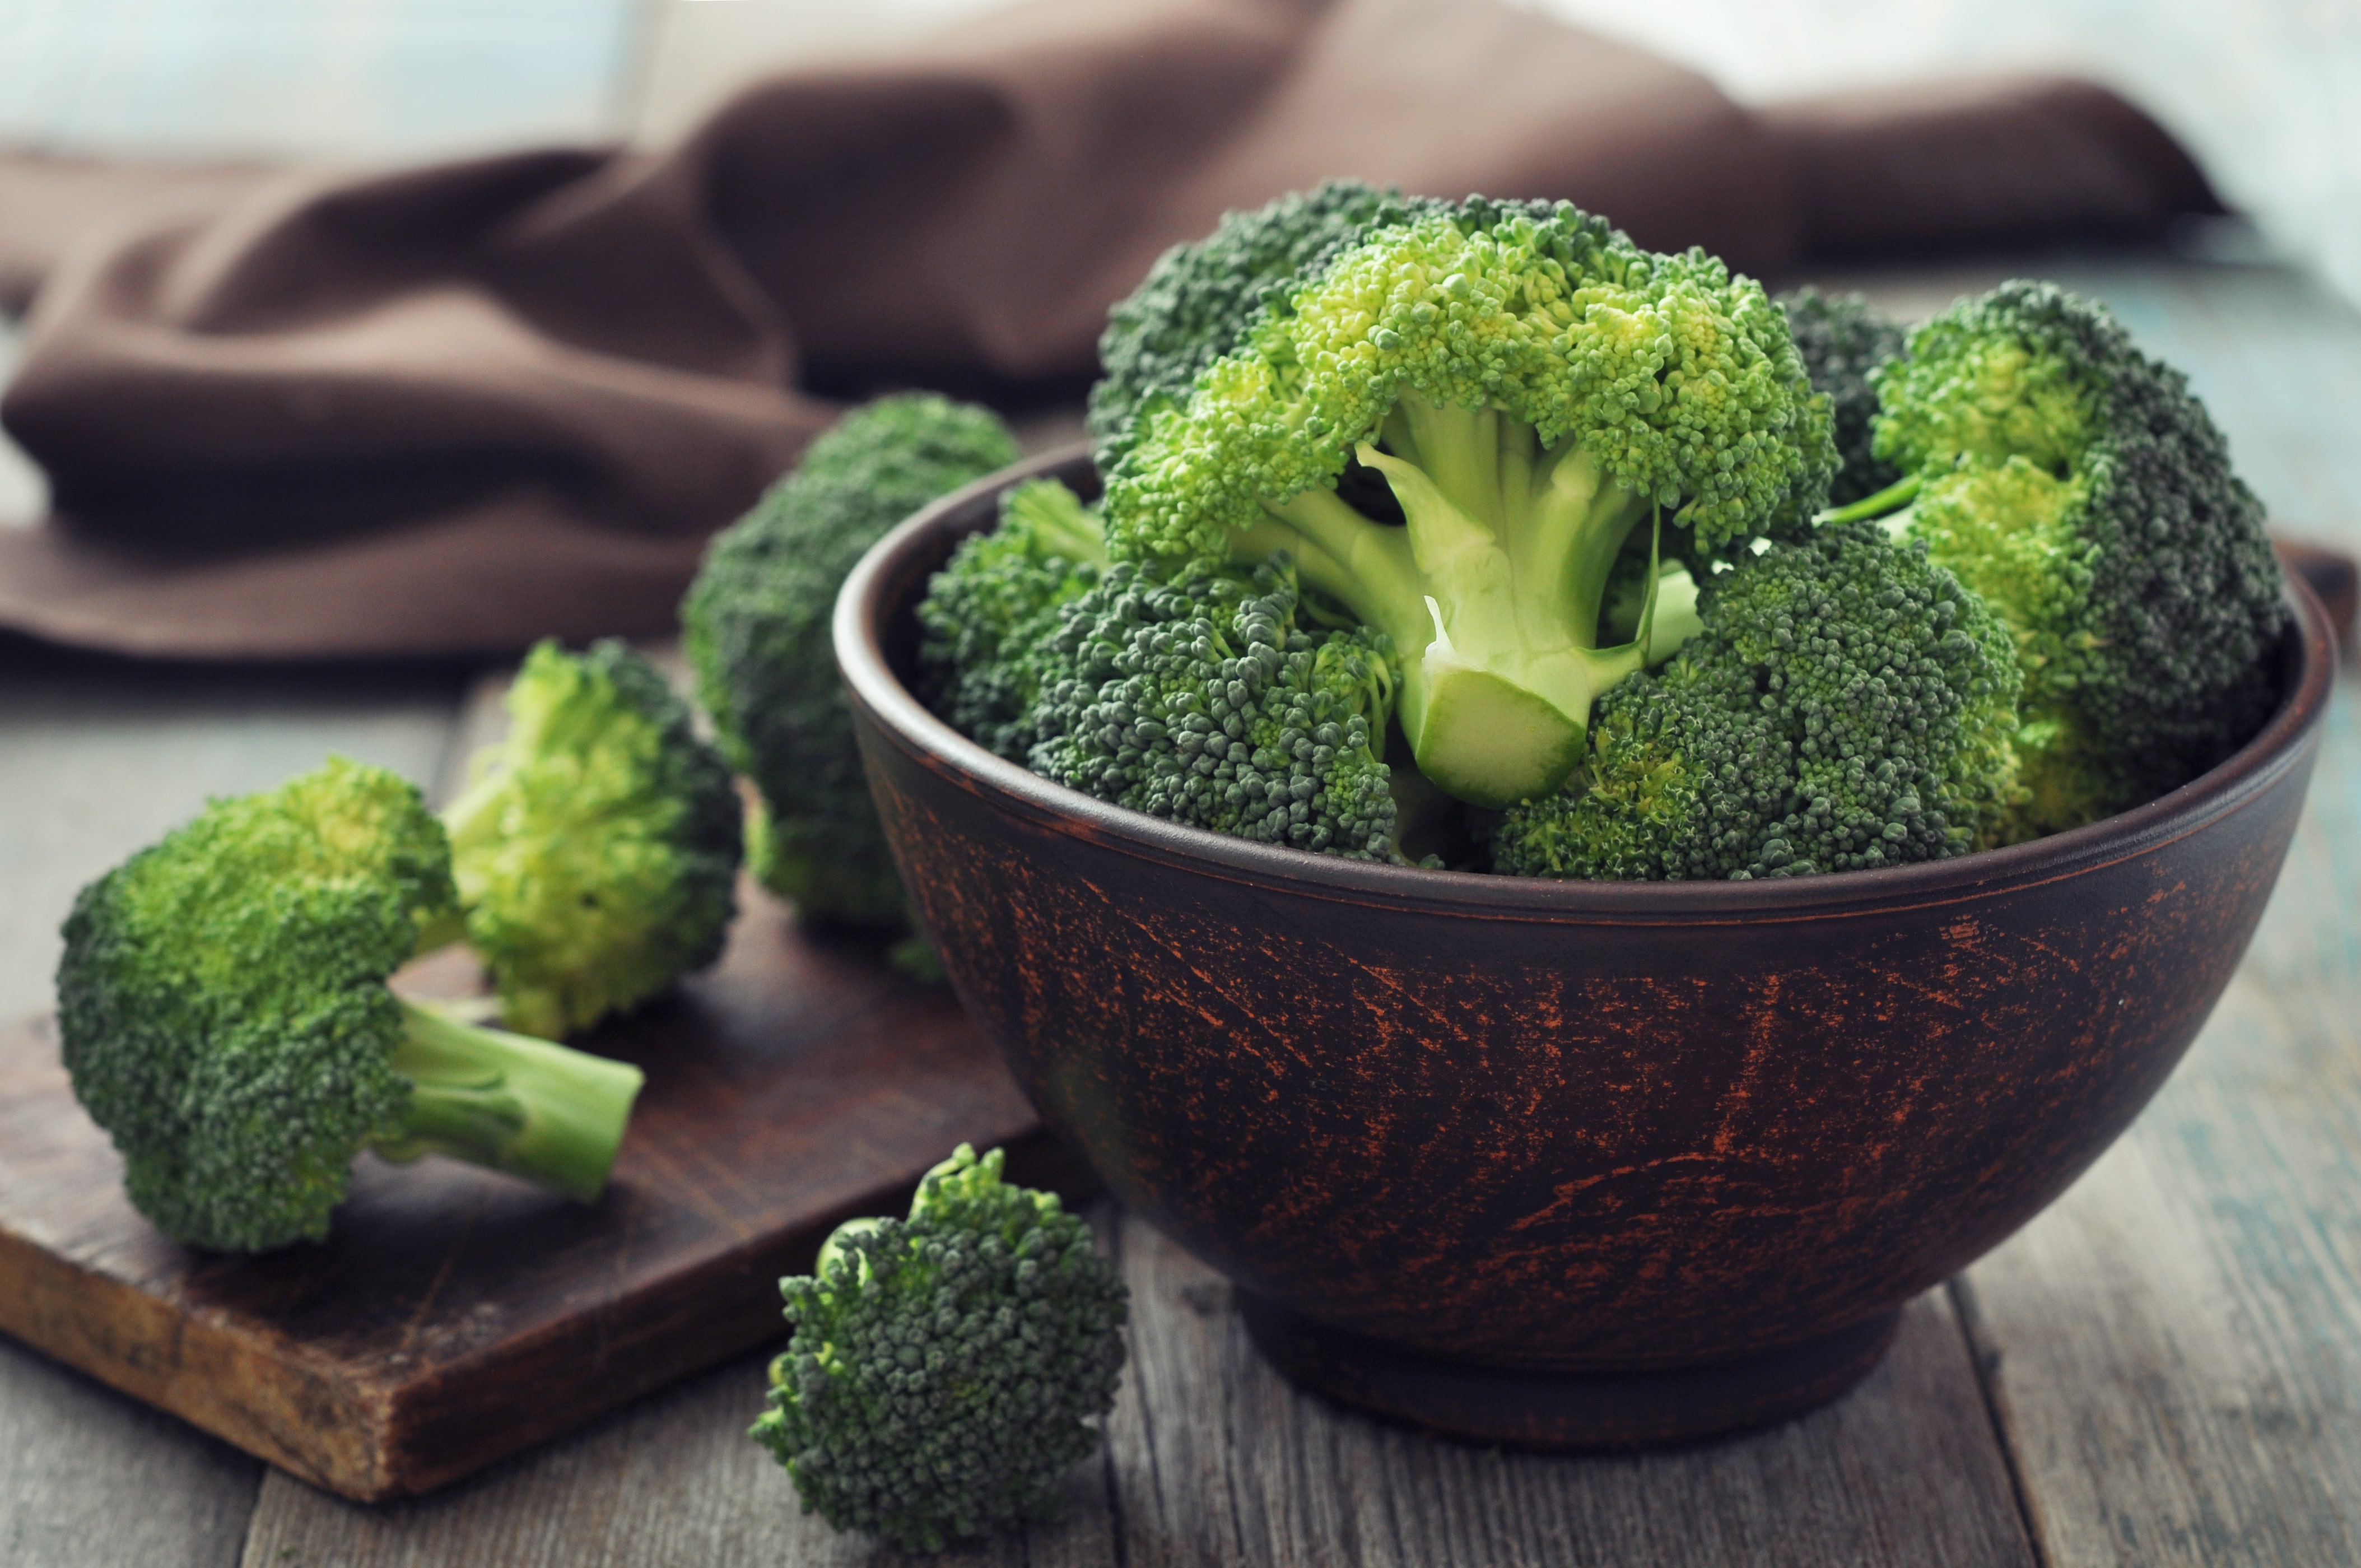 Bunch of fresh green broccoli in brown bowl over wooden background